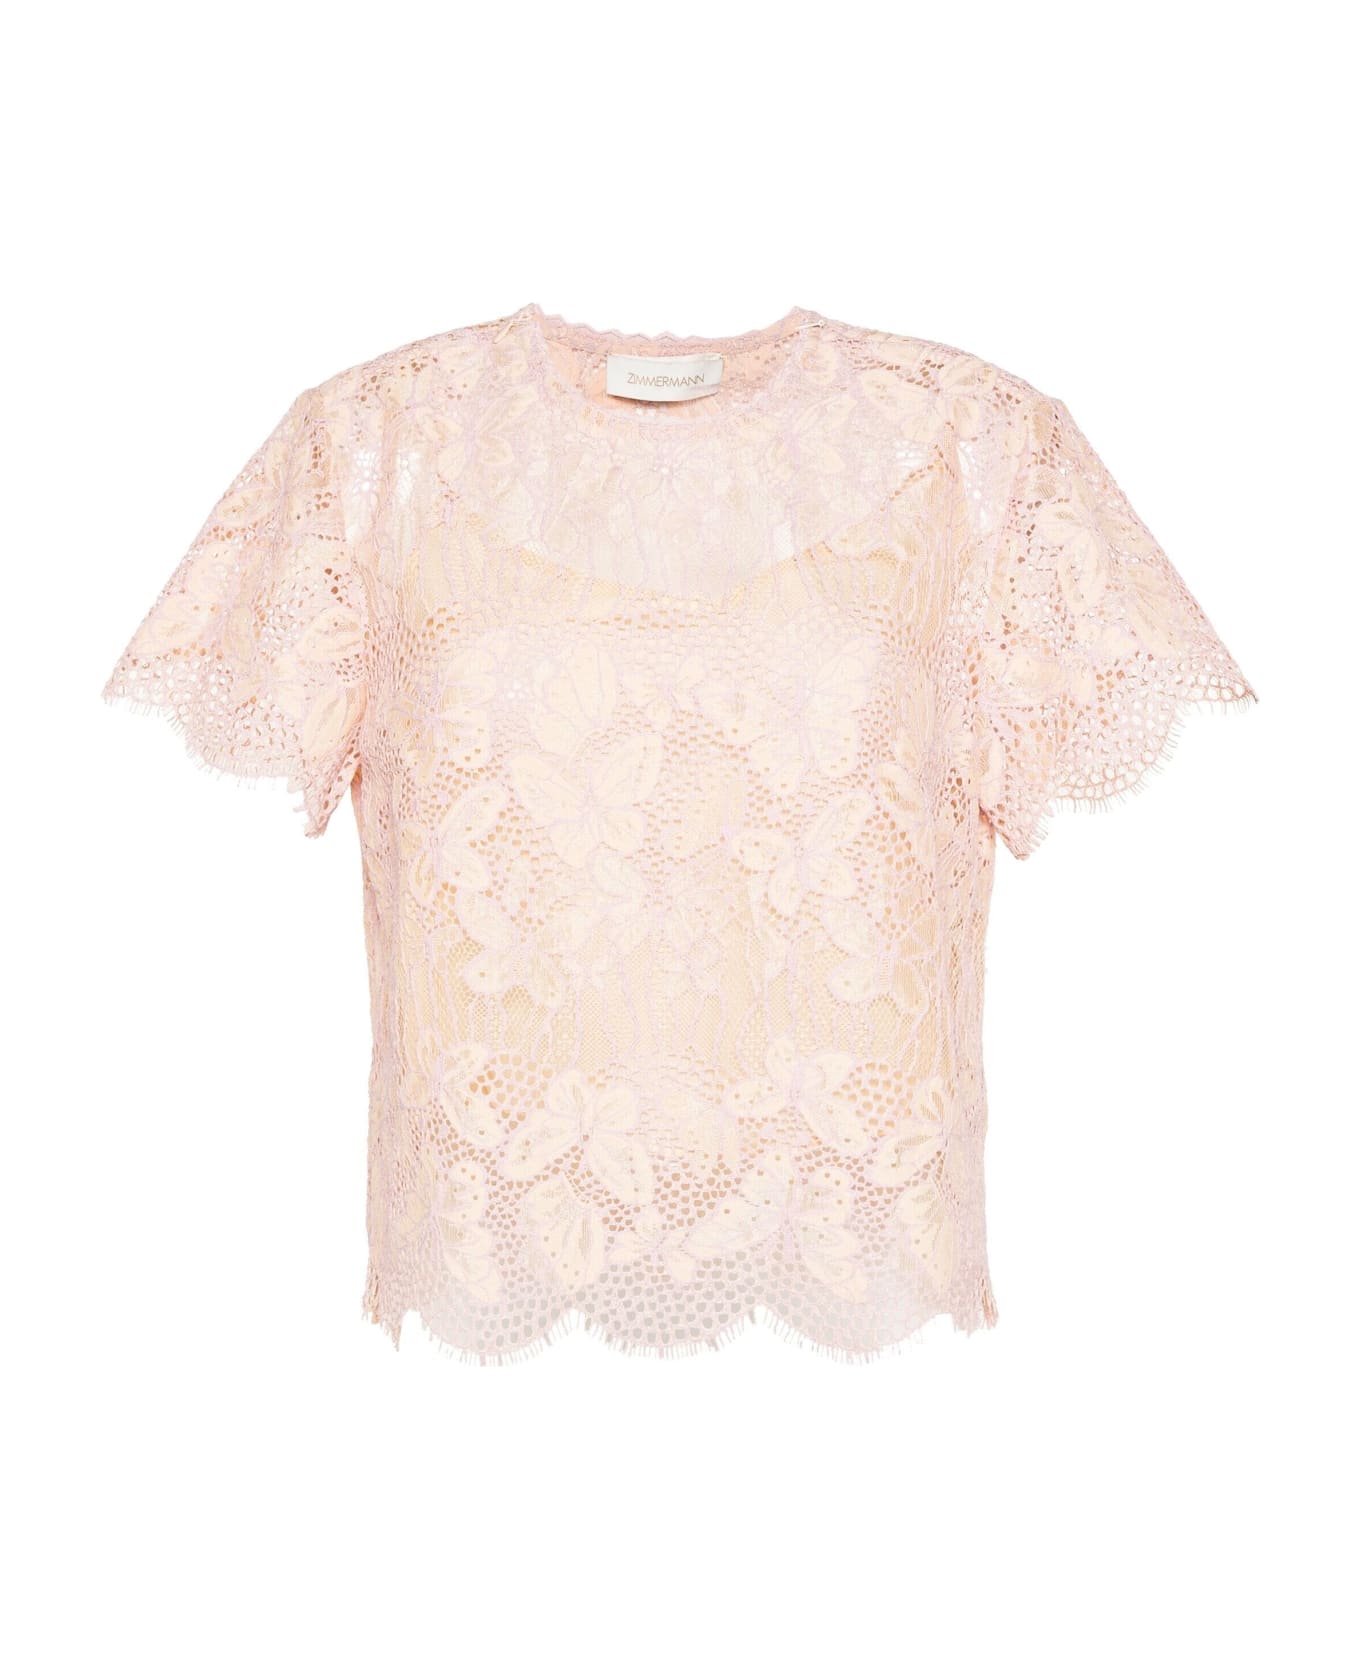 Zimmermann Top M/m In Pizzo - Orc Orchid トップス